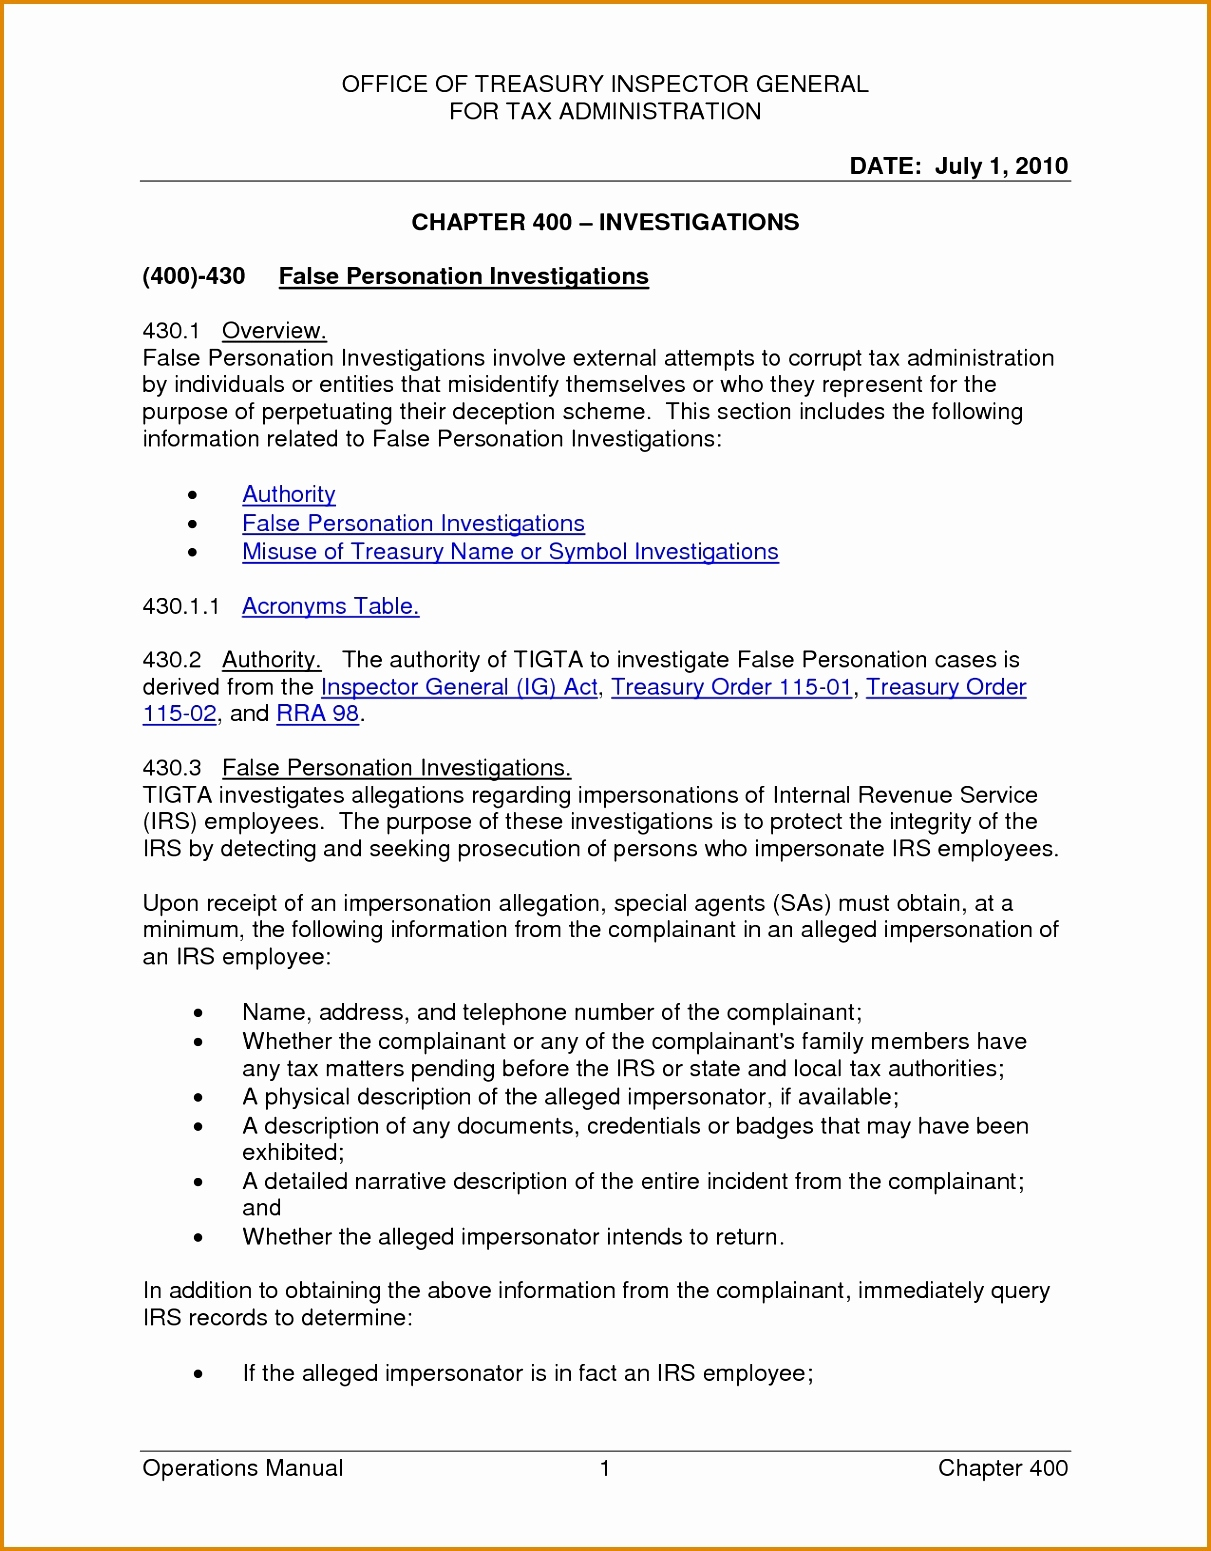 cease and desist letter non compete template Collection-Cease and Desist Letter Template Lovely Cease and Desist Template Fiveoutsiders 13-d